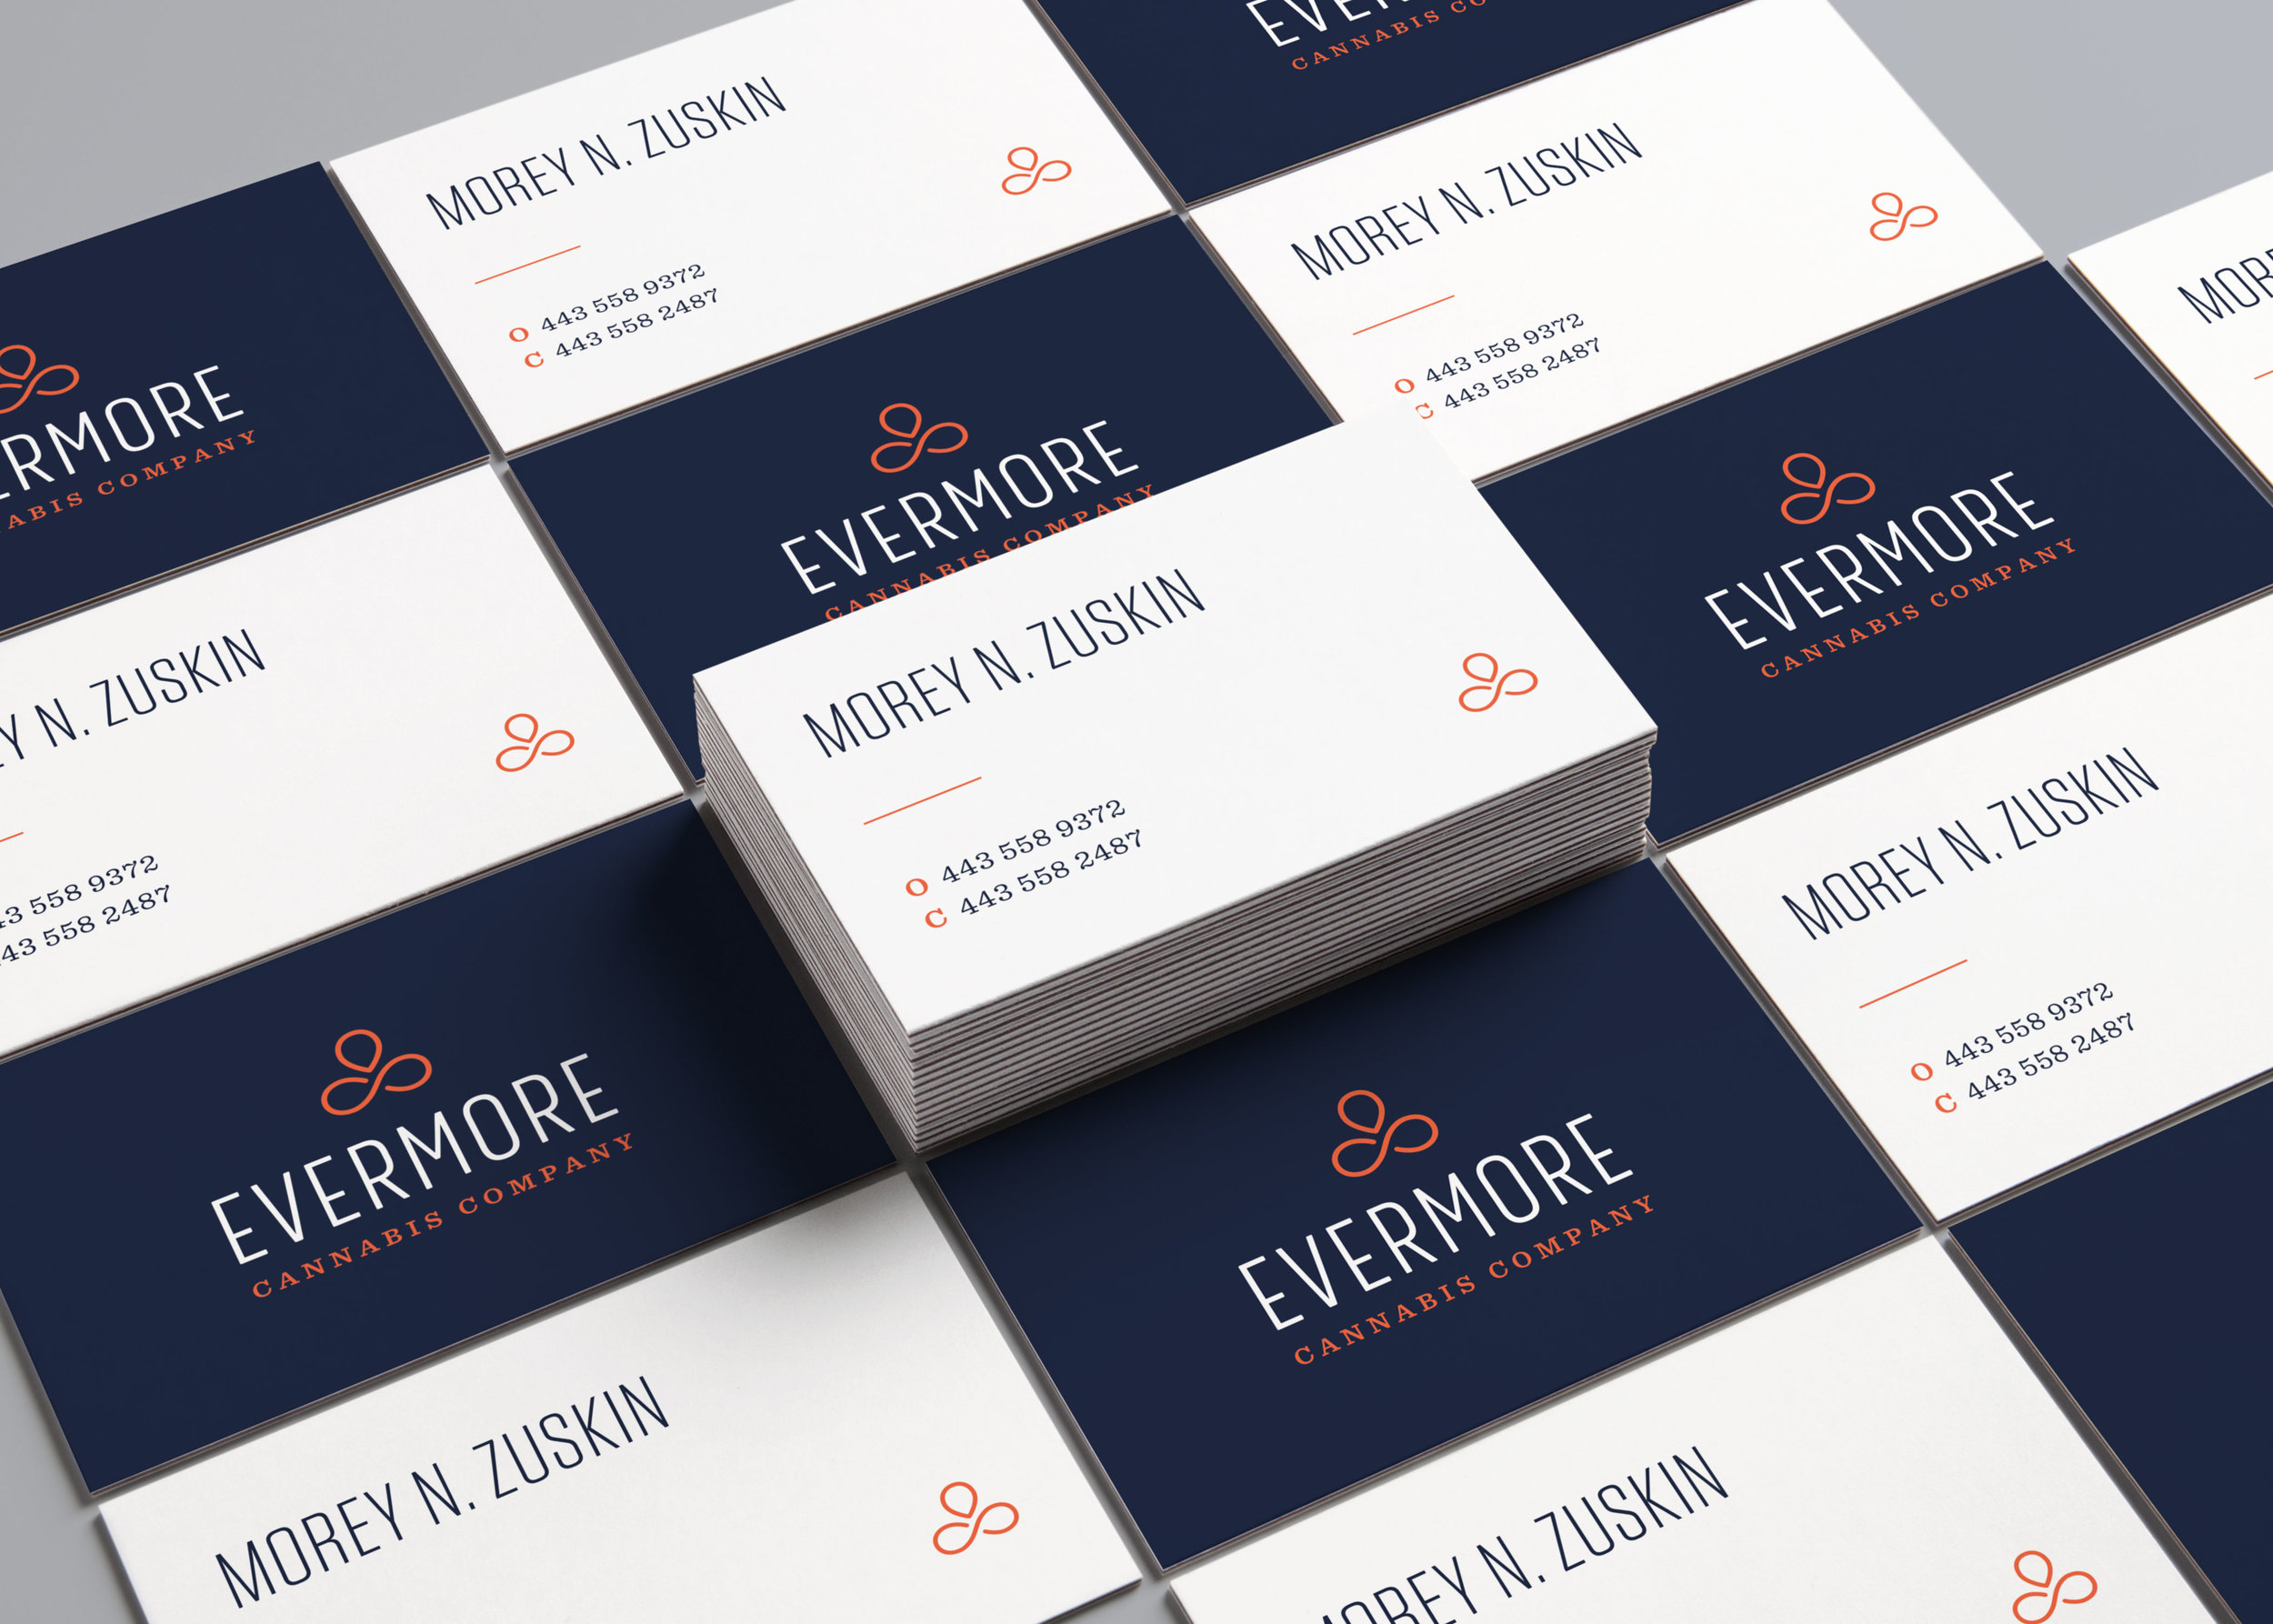 Evermore Cannabis Collective: Business Card Design